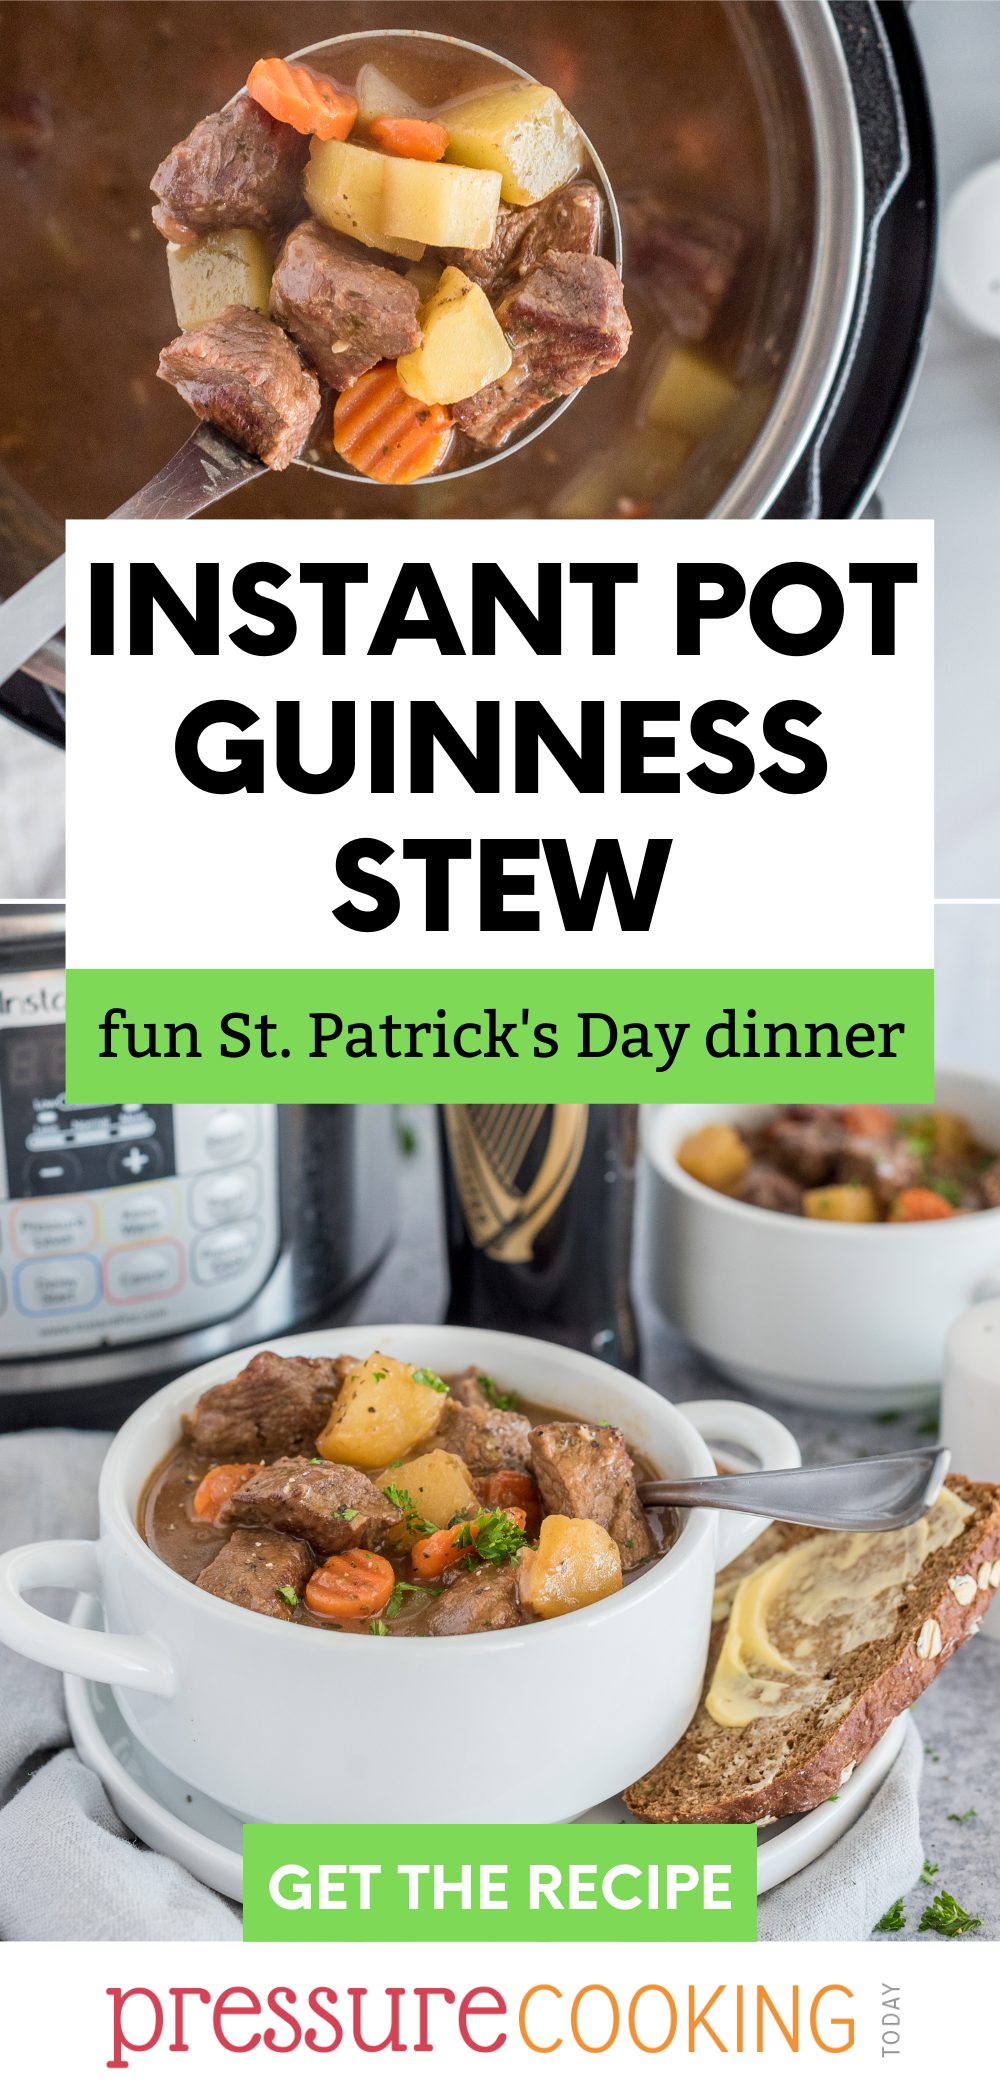 Pinterest image promoting Instant Pot Guinness Stew over two images: the top with a ladle full of stew and the bottom with the stew in a white bowl in front of an Instant Pot and a bottle of Guiness via @PressureCook2da